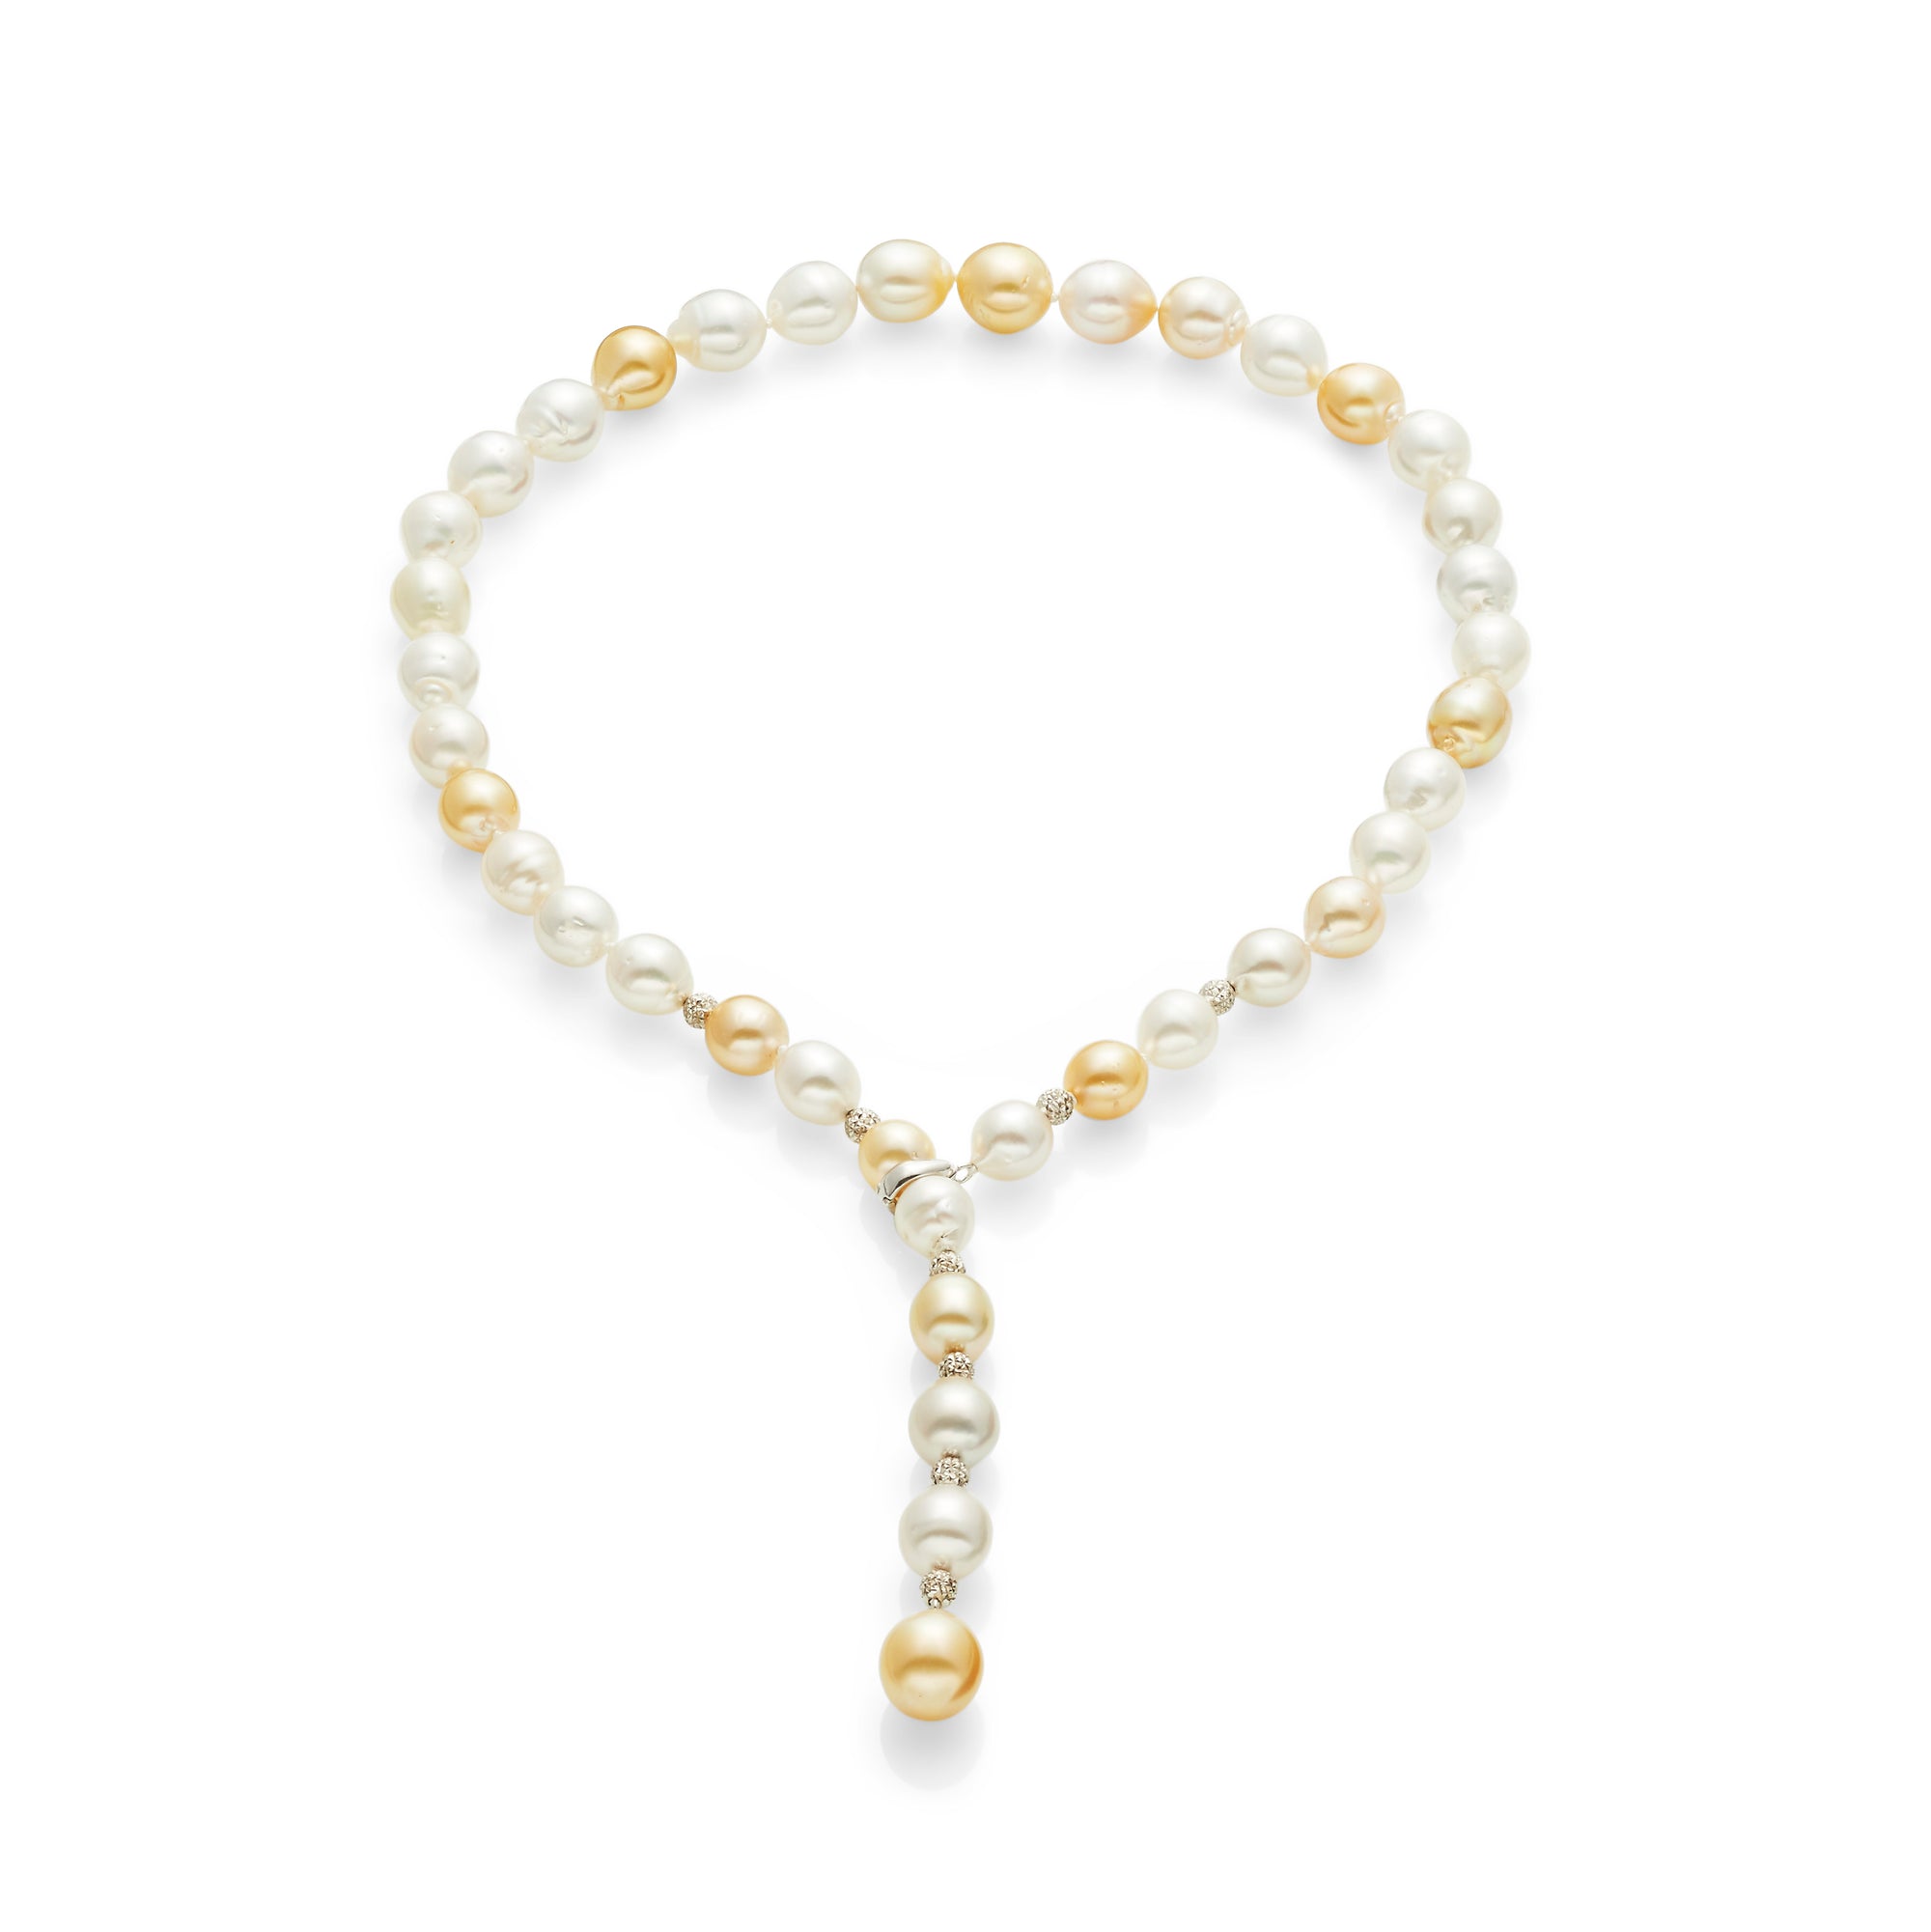 Y-shaped Tahiti Pearl necklace with beads